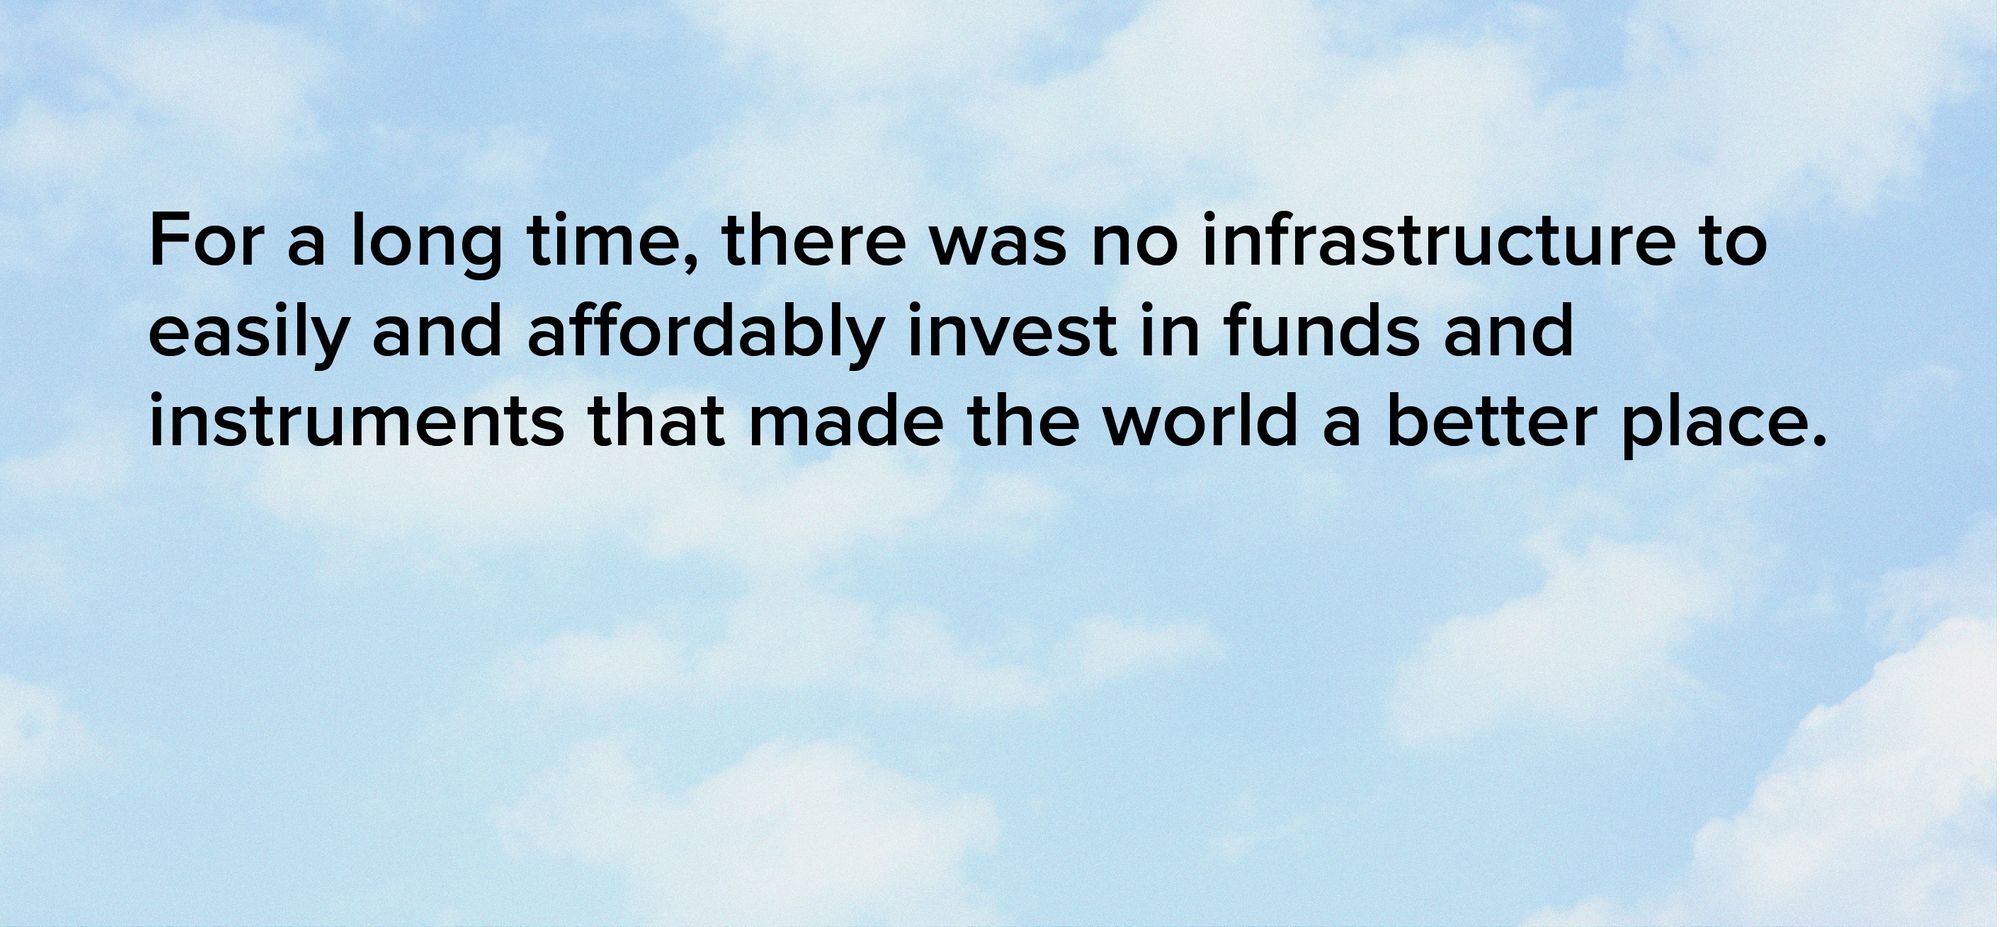 For a long time, there was no infrastructure to easily and affordably invest in funds and instruments that made the world a better place.